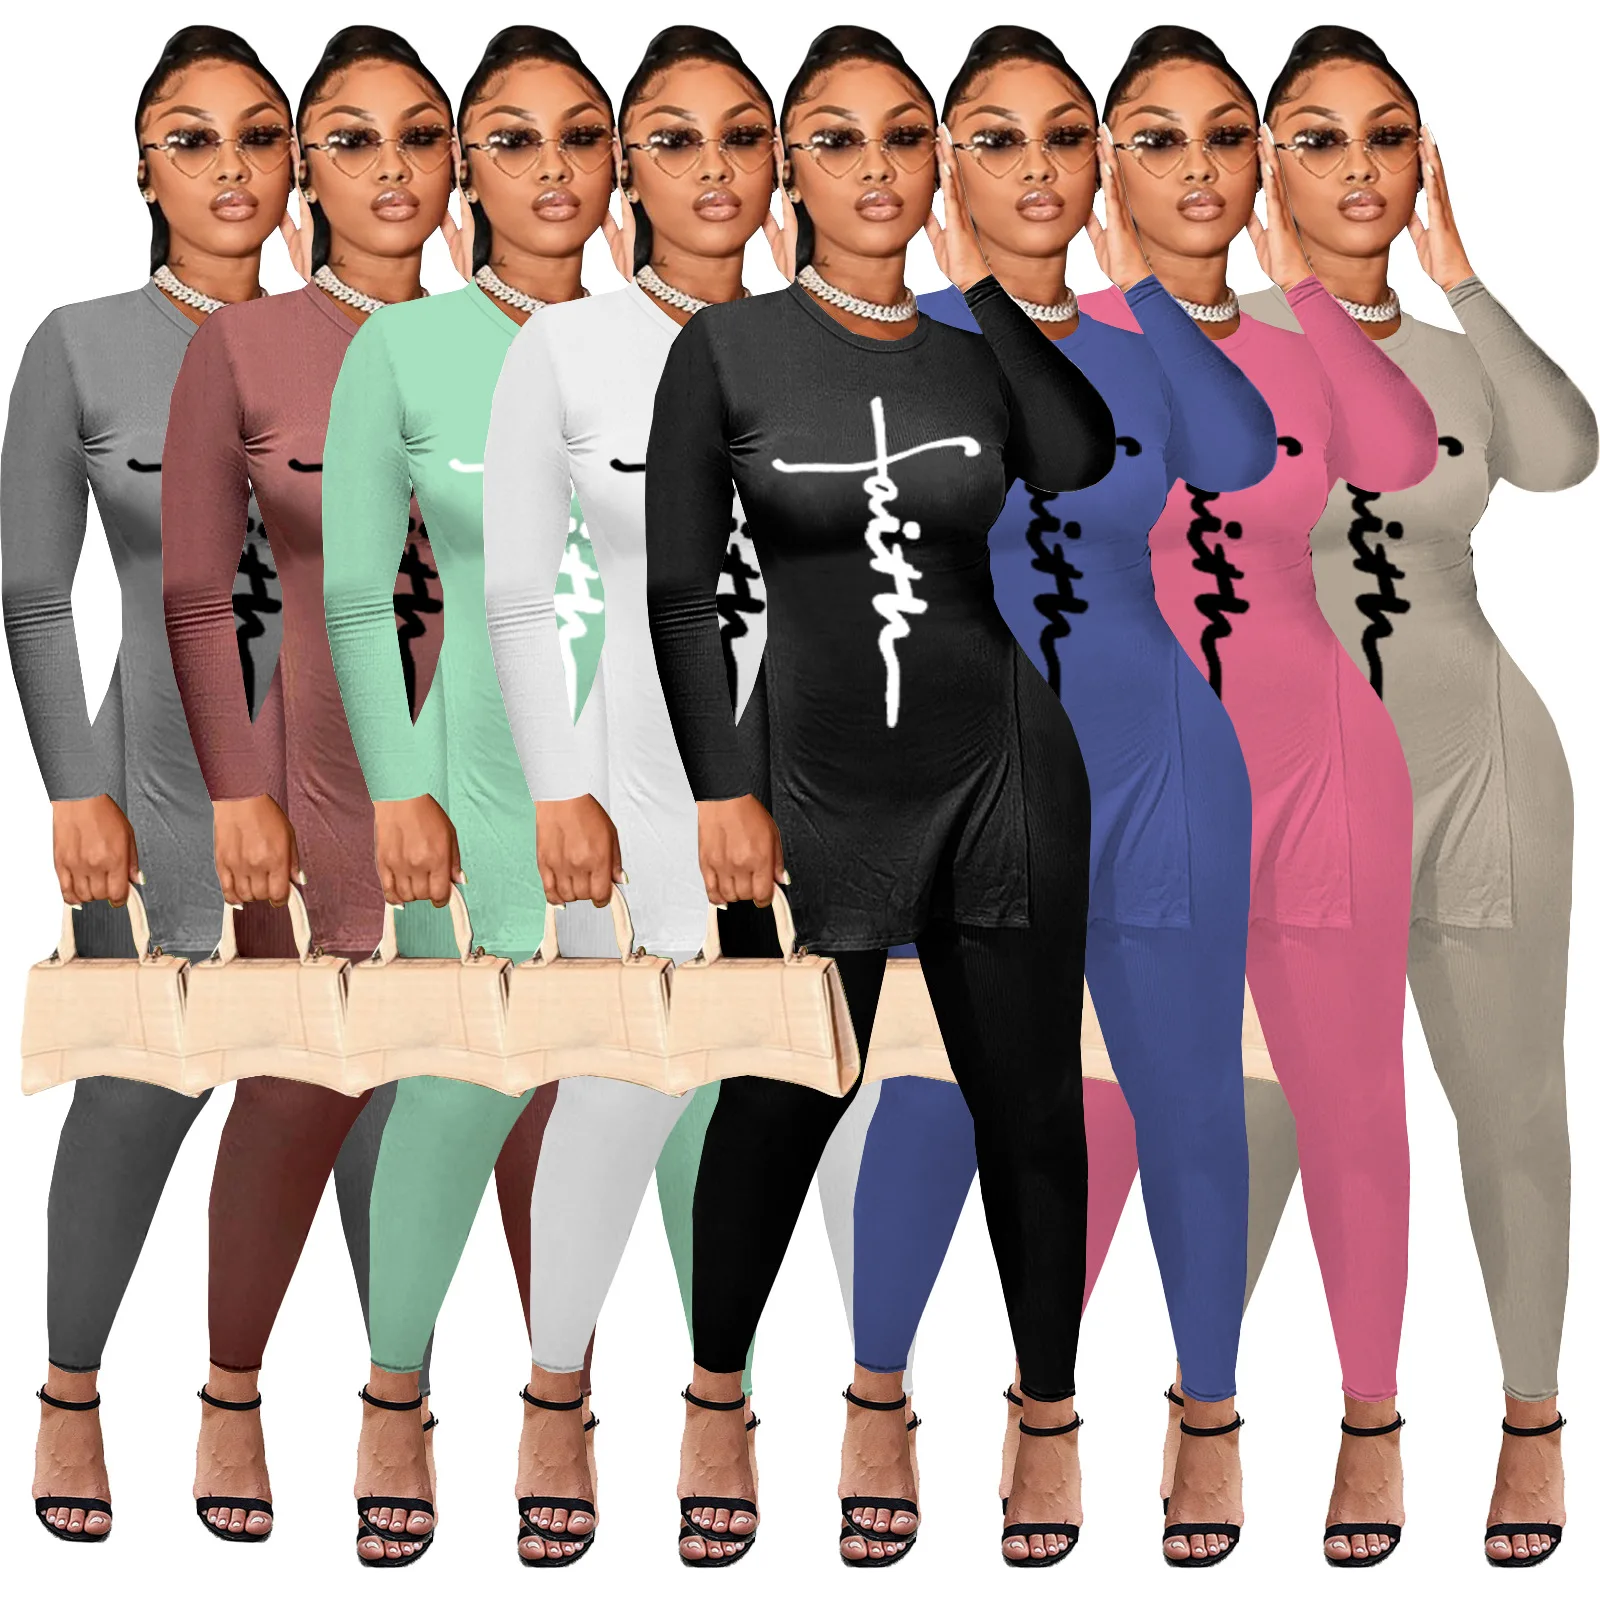 

Casual Plus Size 5XL Customized Letter Print Long Sleeve Womens 2 Piece Sports Outfit Tracksuit Shirt Shorts Jogger Bodycon Sets